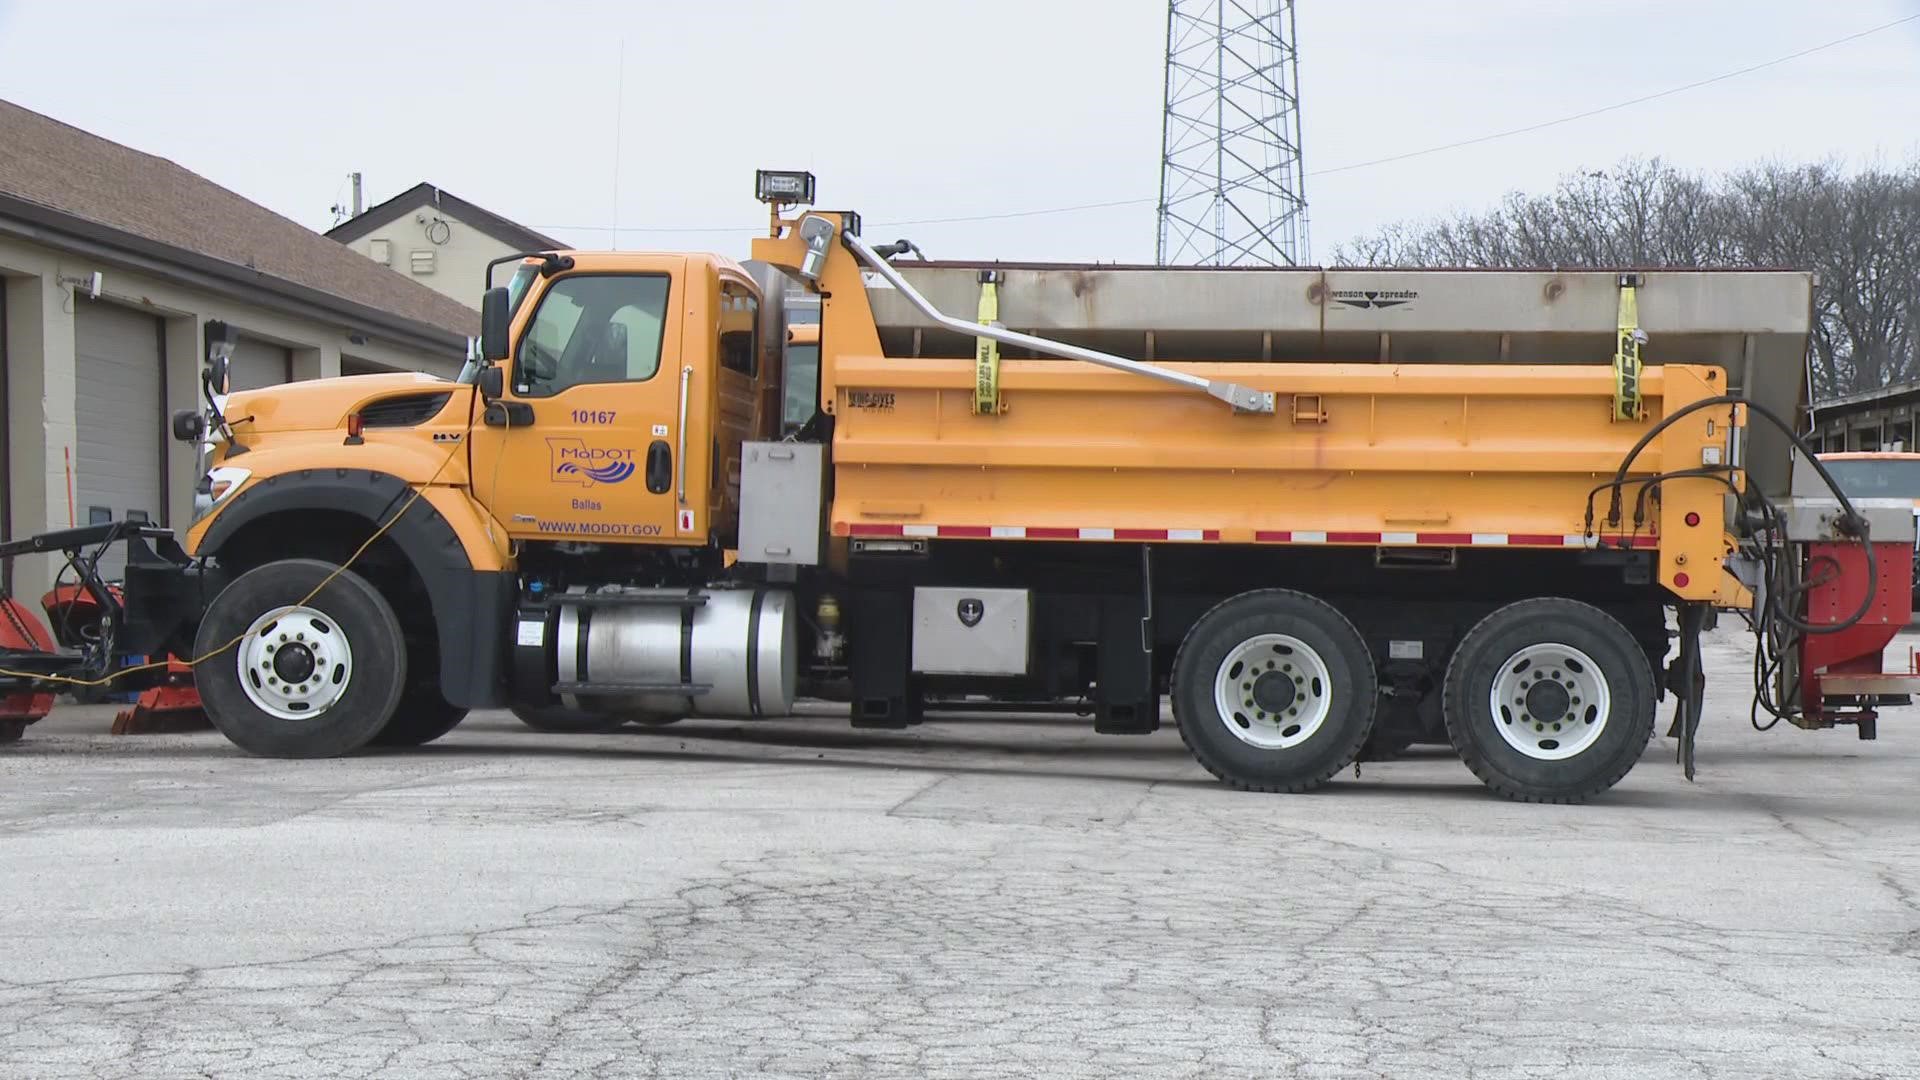 Road crews in Illinois and Missouri have been preparing overnight for heavy snow Wednesday.